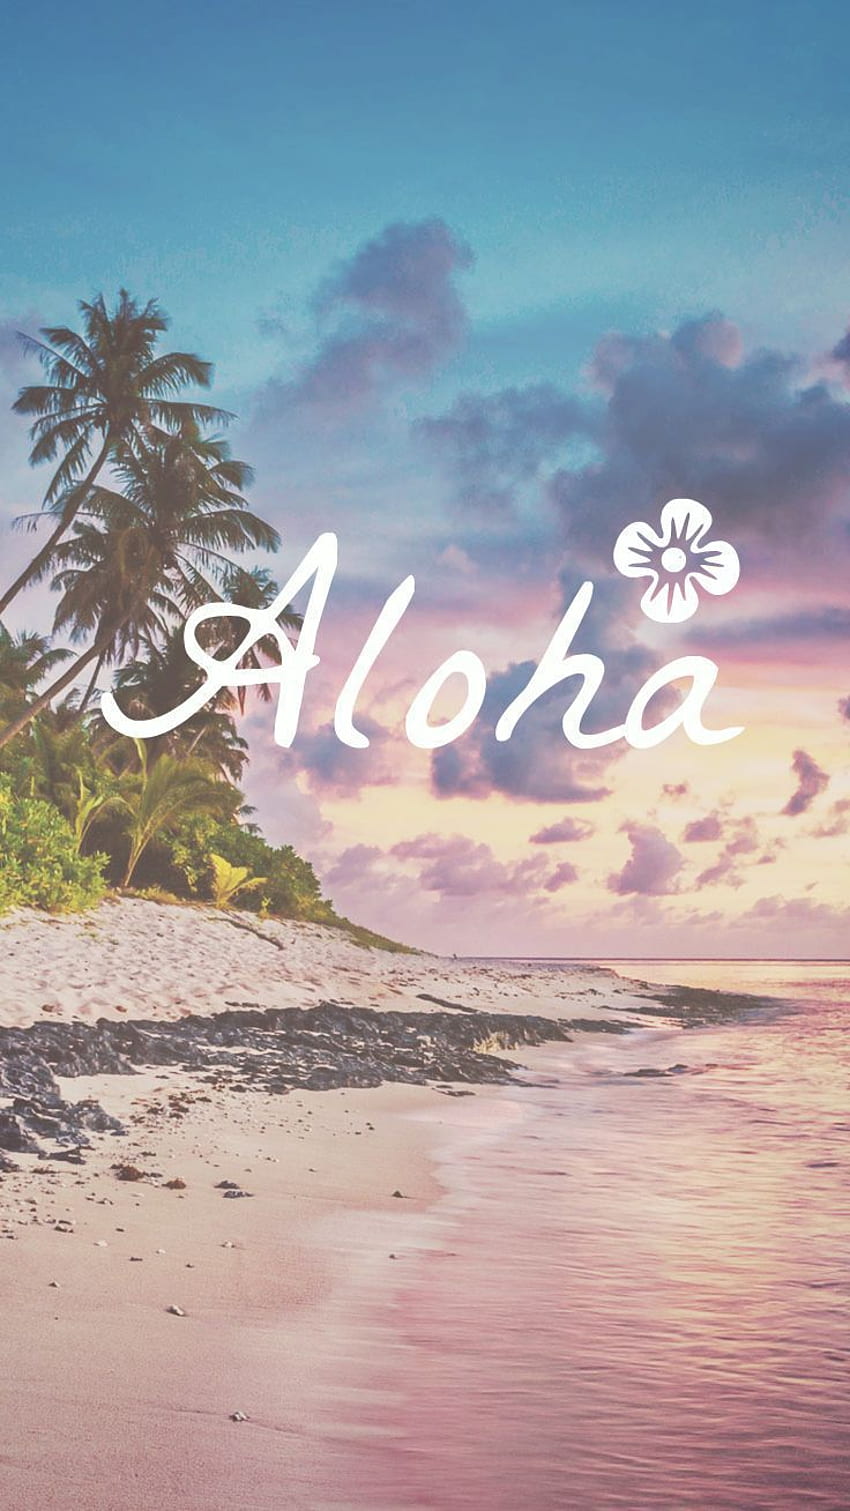 Perfect for Summer holiday beach vibes - Tropical island seaside with Aloha makes an awesome. iphone summer, Summer , iPhone preppy HD phone wallpaper